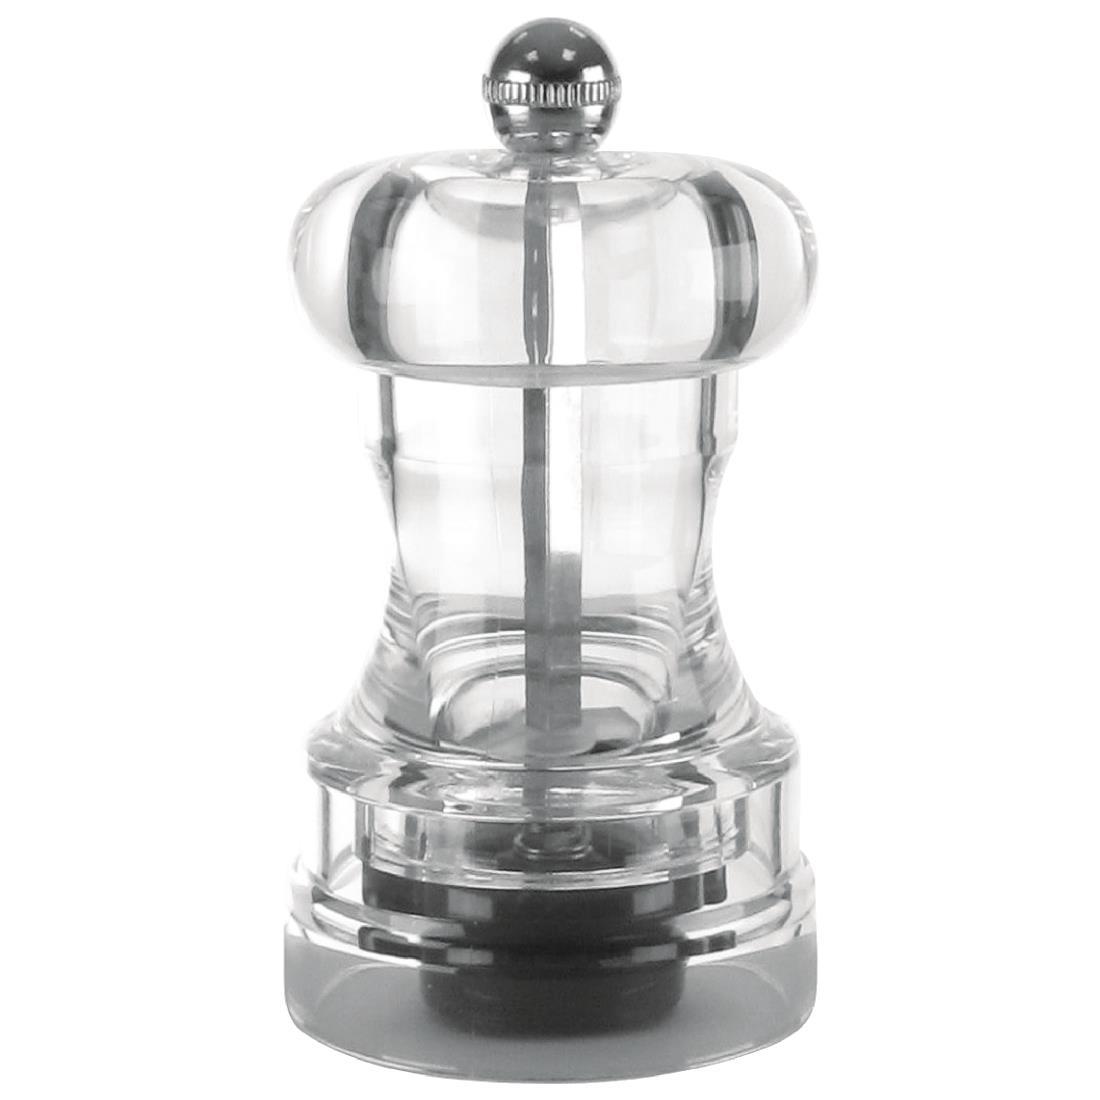 Acrylic Salt and Pepper Mill 102mm - CE318  - 1